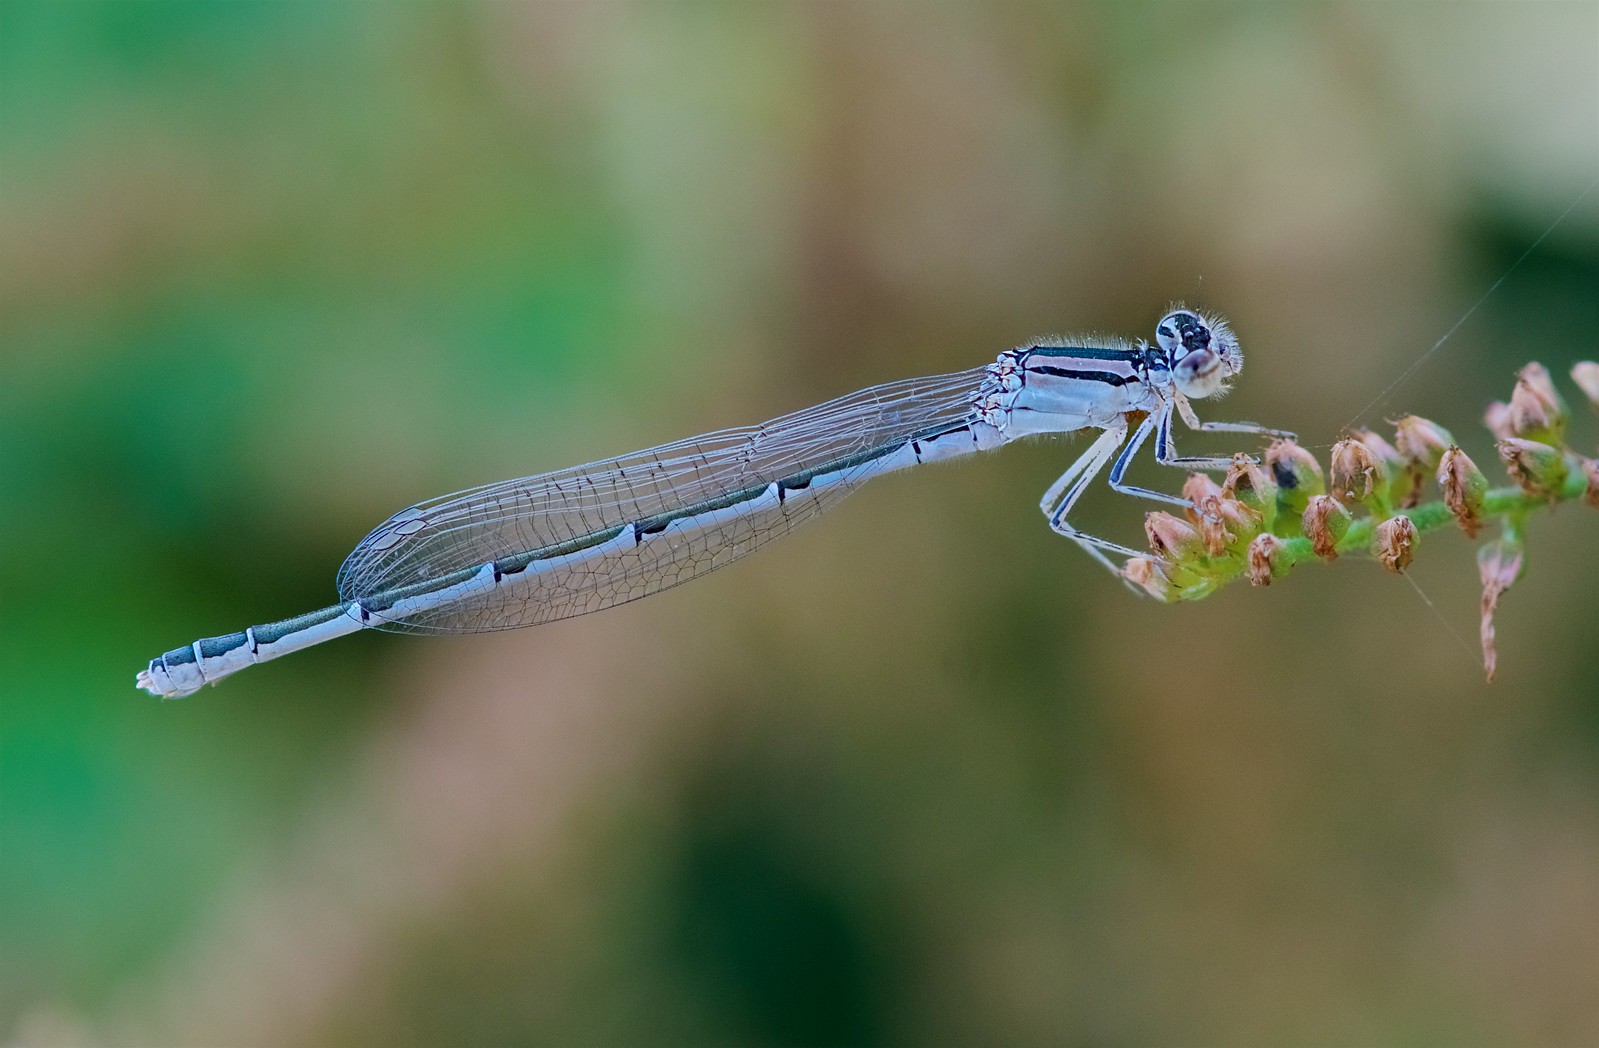 Damselfly at Rest